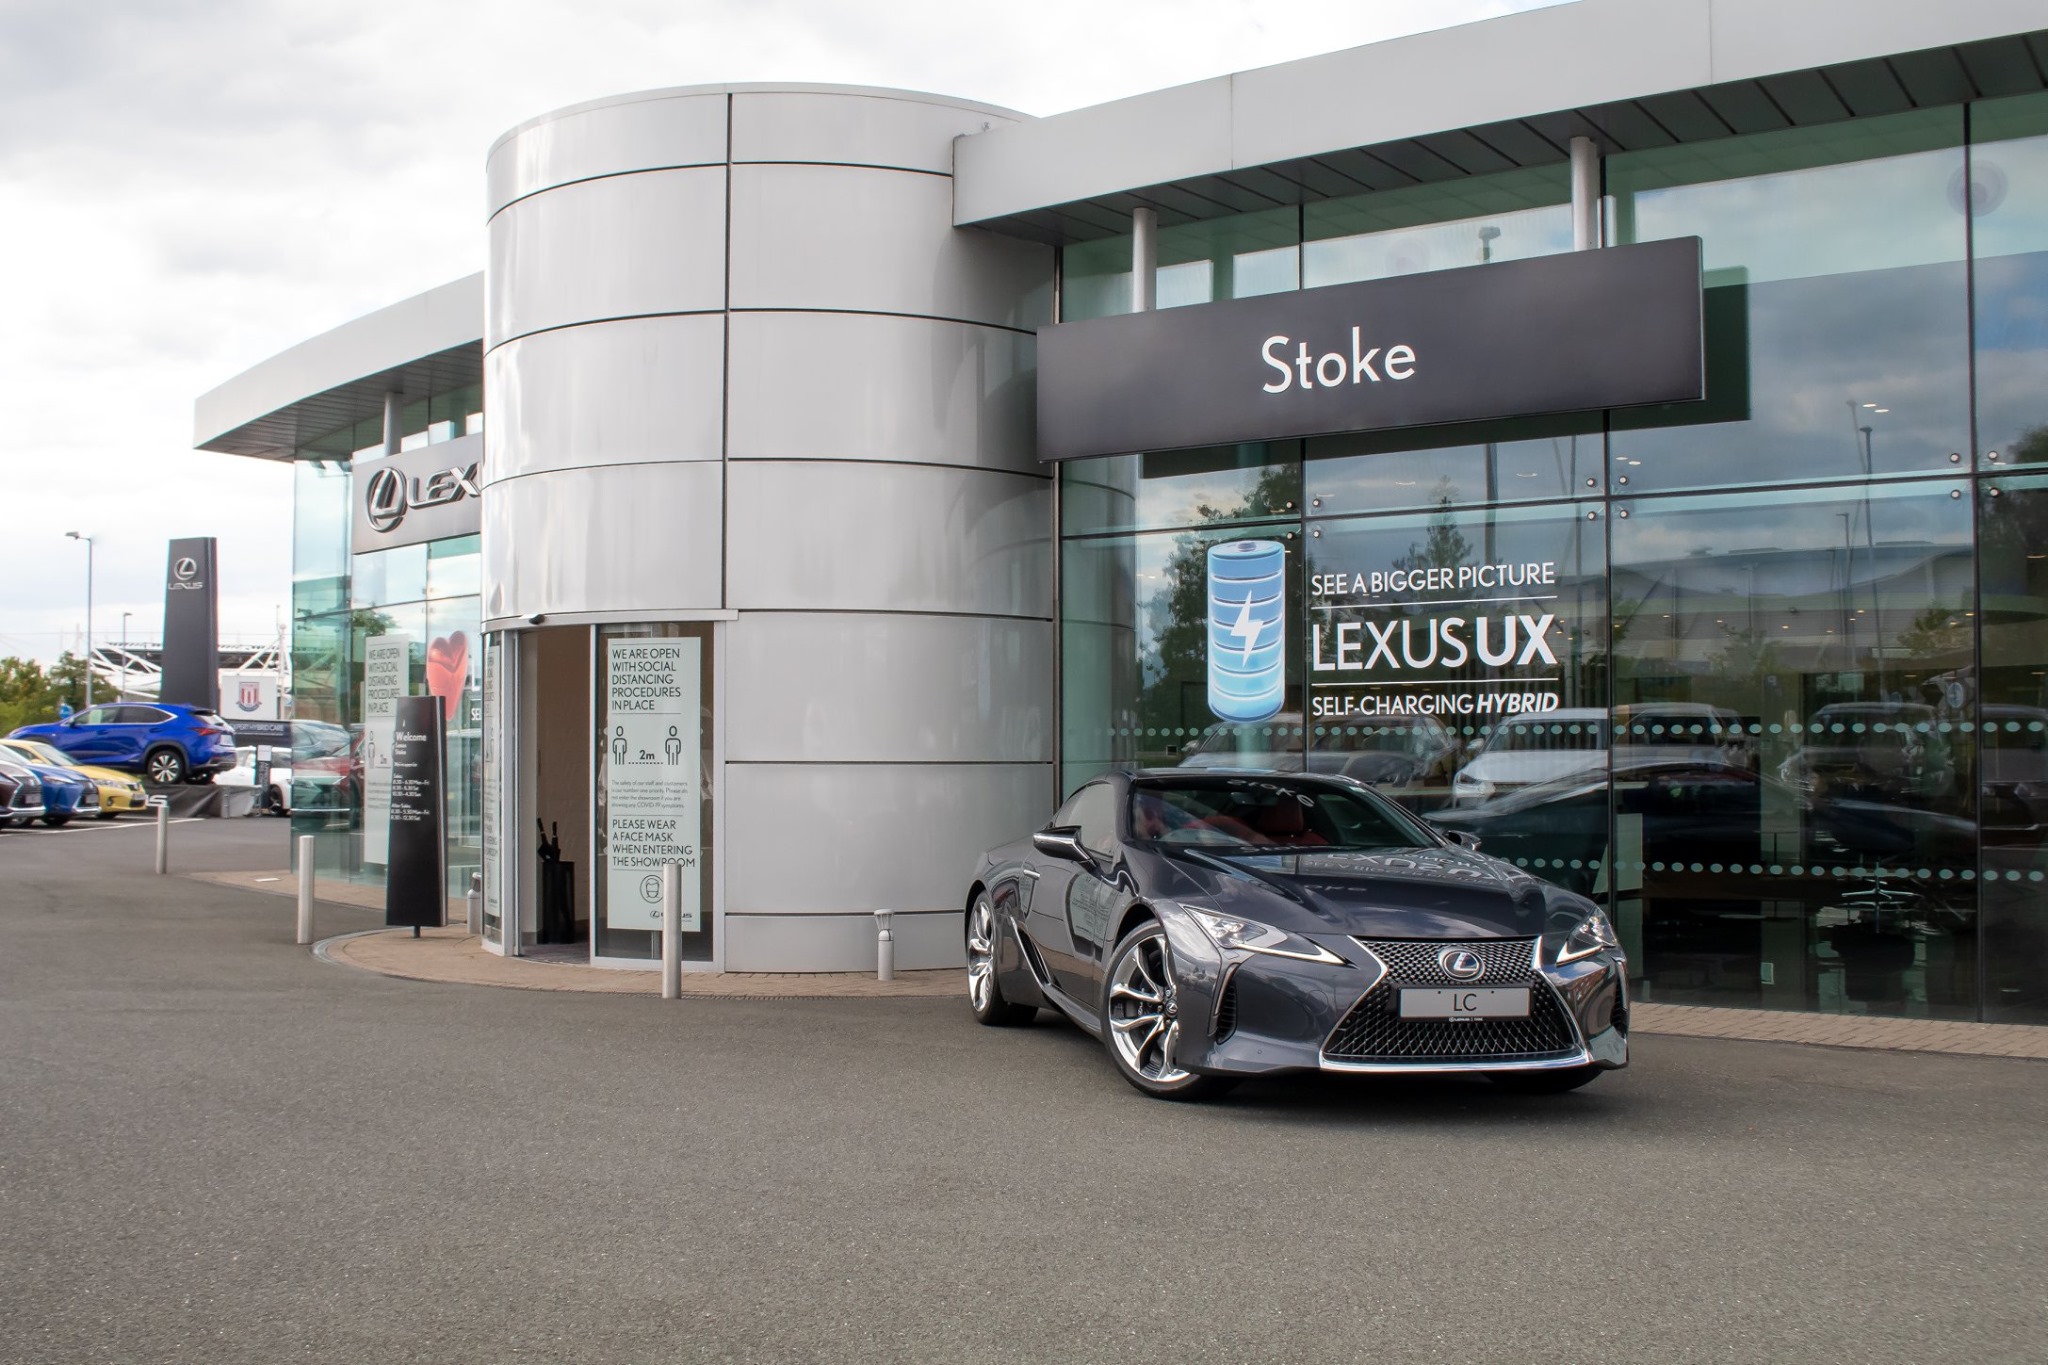 Lexus Stoke has been named Centre of the Year in the 2020 Lexus Centre of Excellence Awards